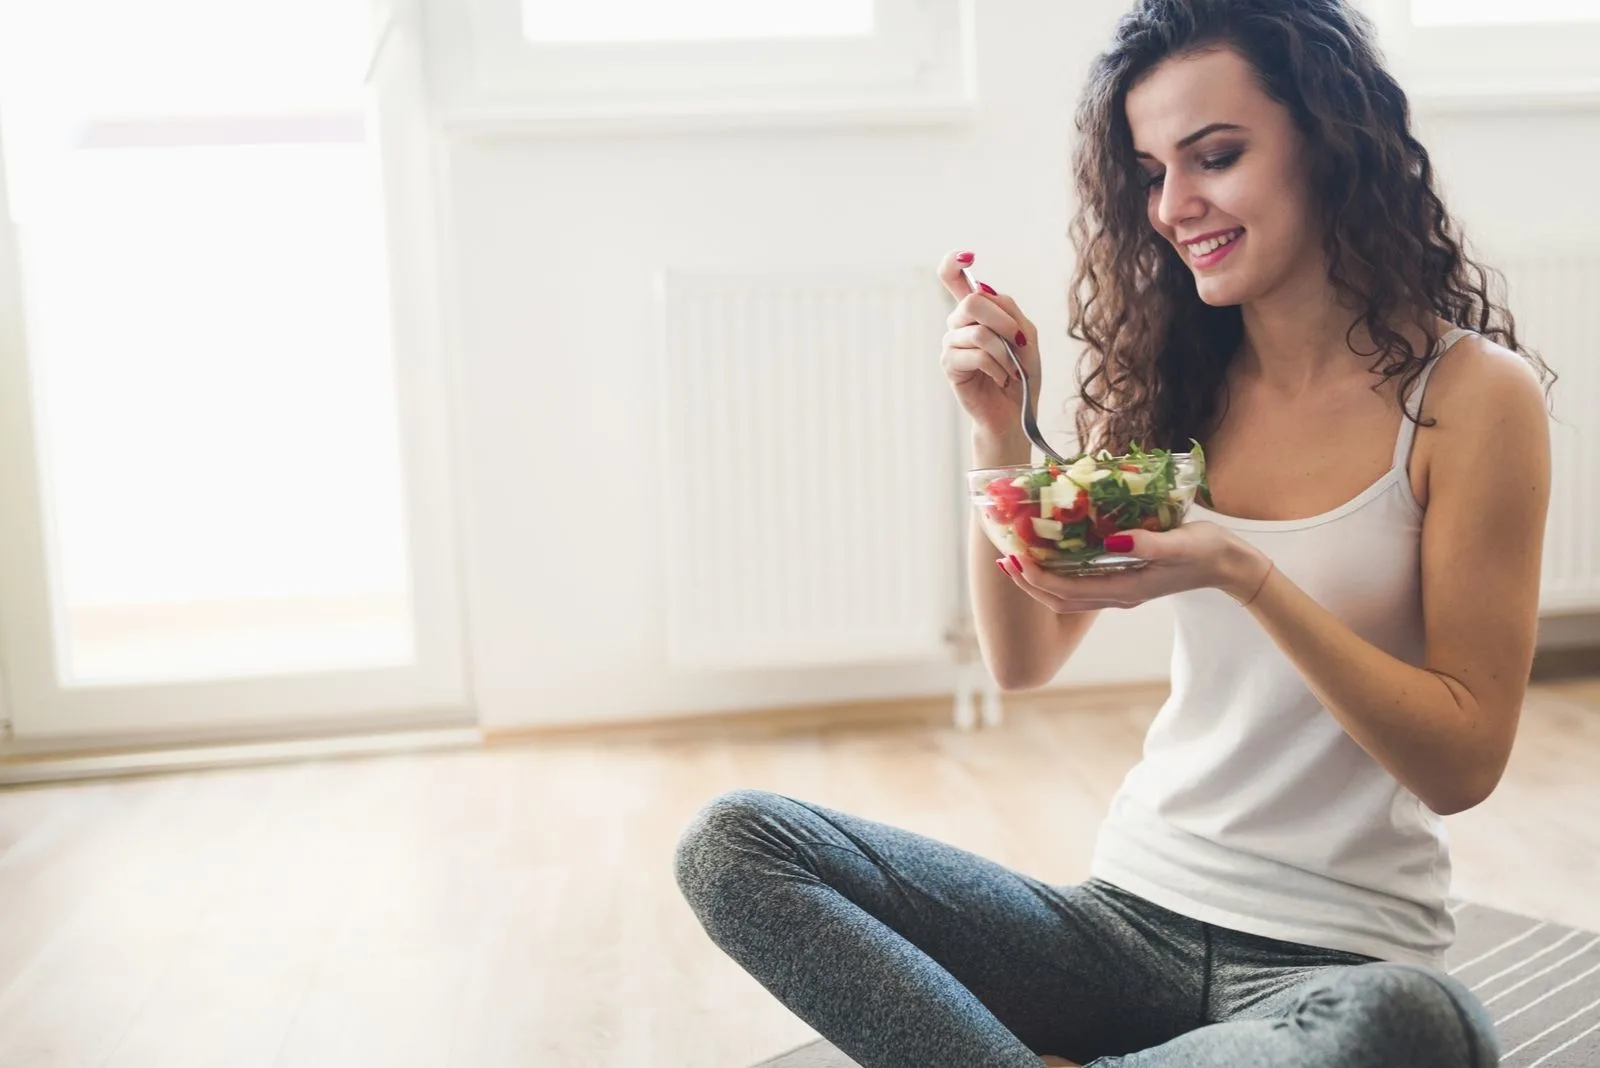 healthy lifestyle of a young woman eating healthy foods while squatting on the floor